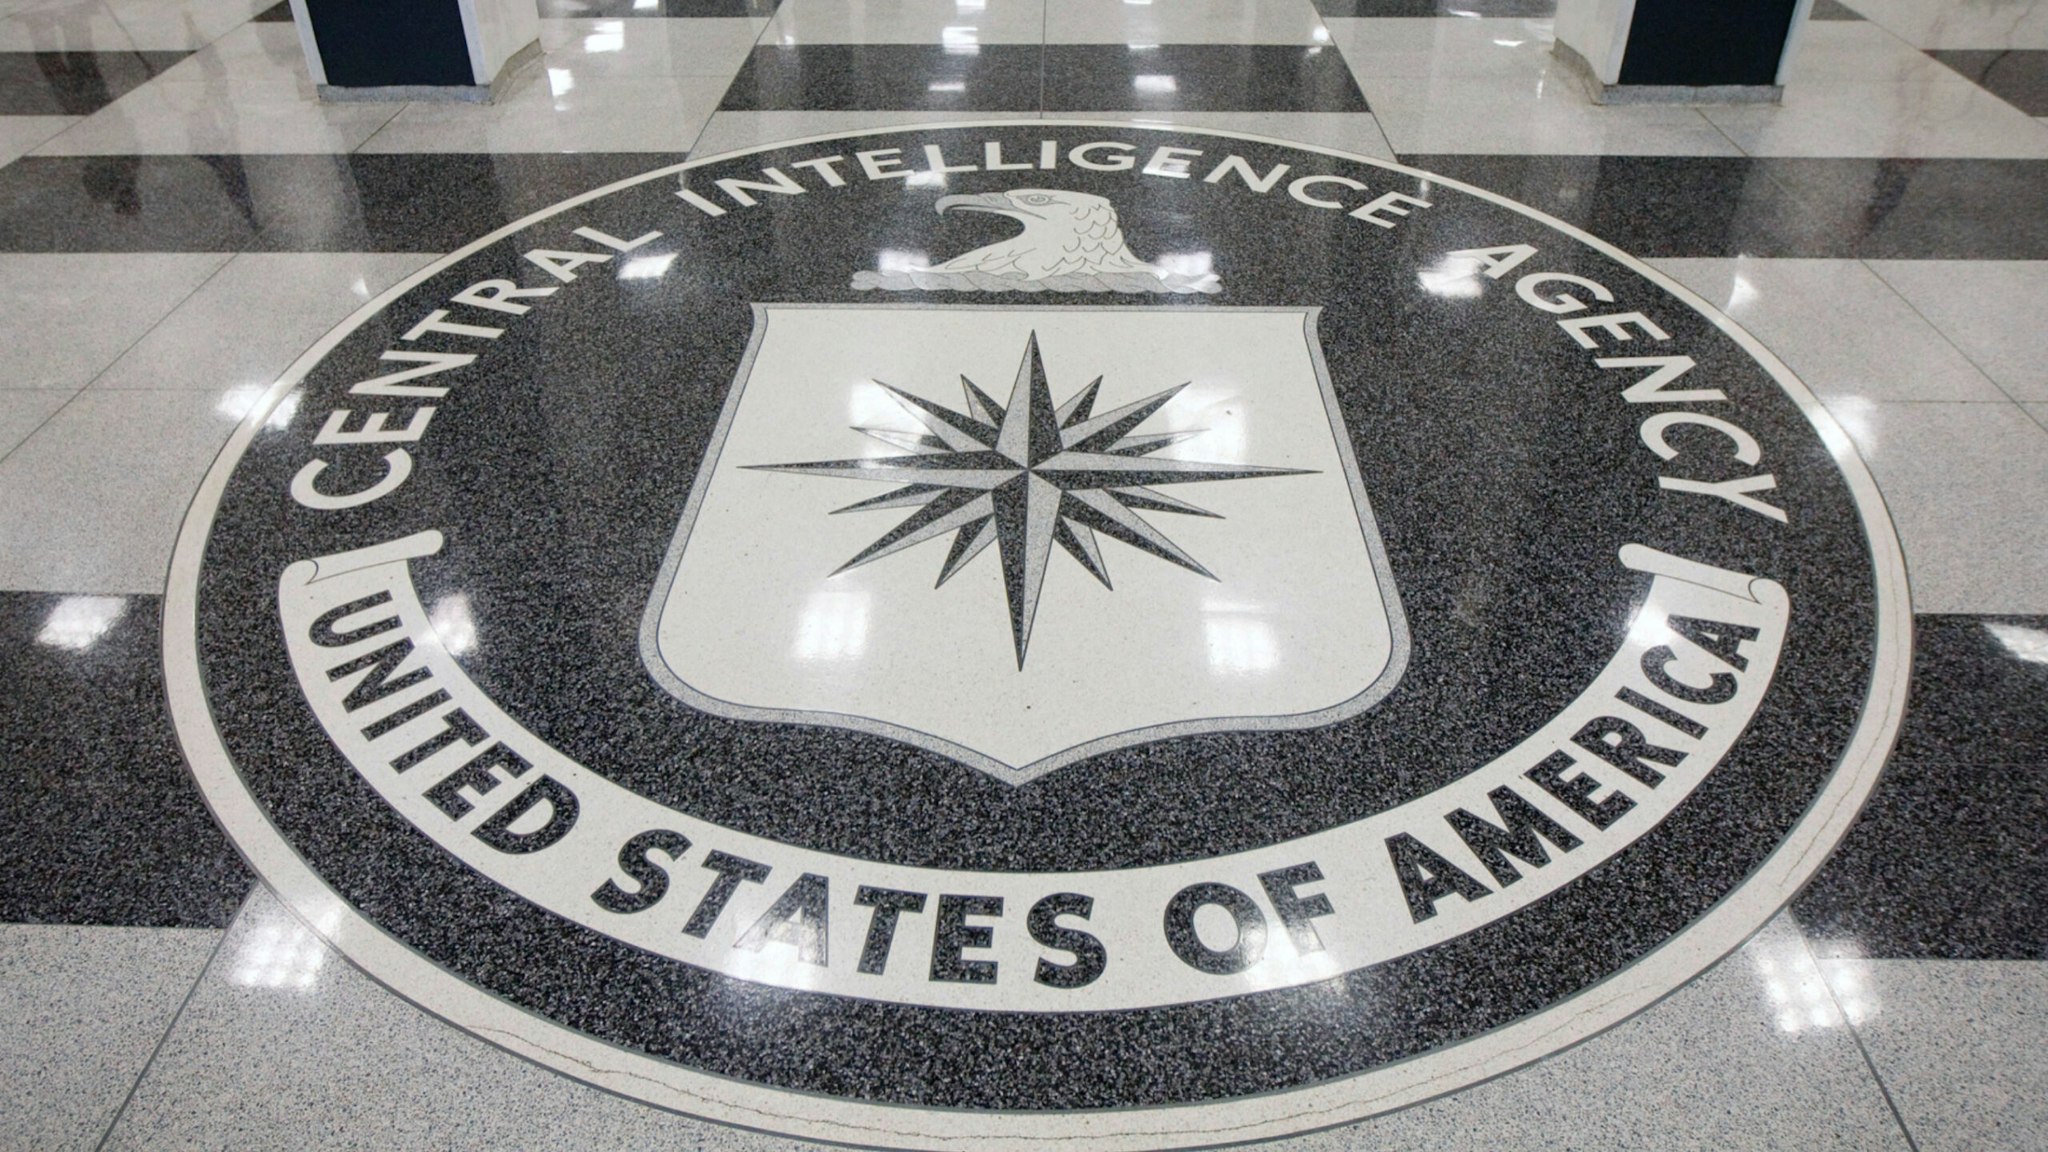 The seal of the Central Intelligence Agency is displayed in the foyer of the original headquarters building in Langley, Virginia, U.S., on Friday, Sept. 18, 2009.